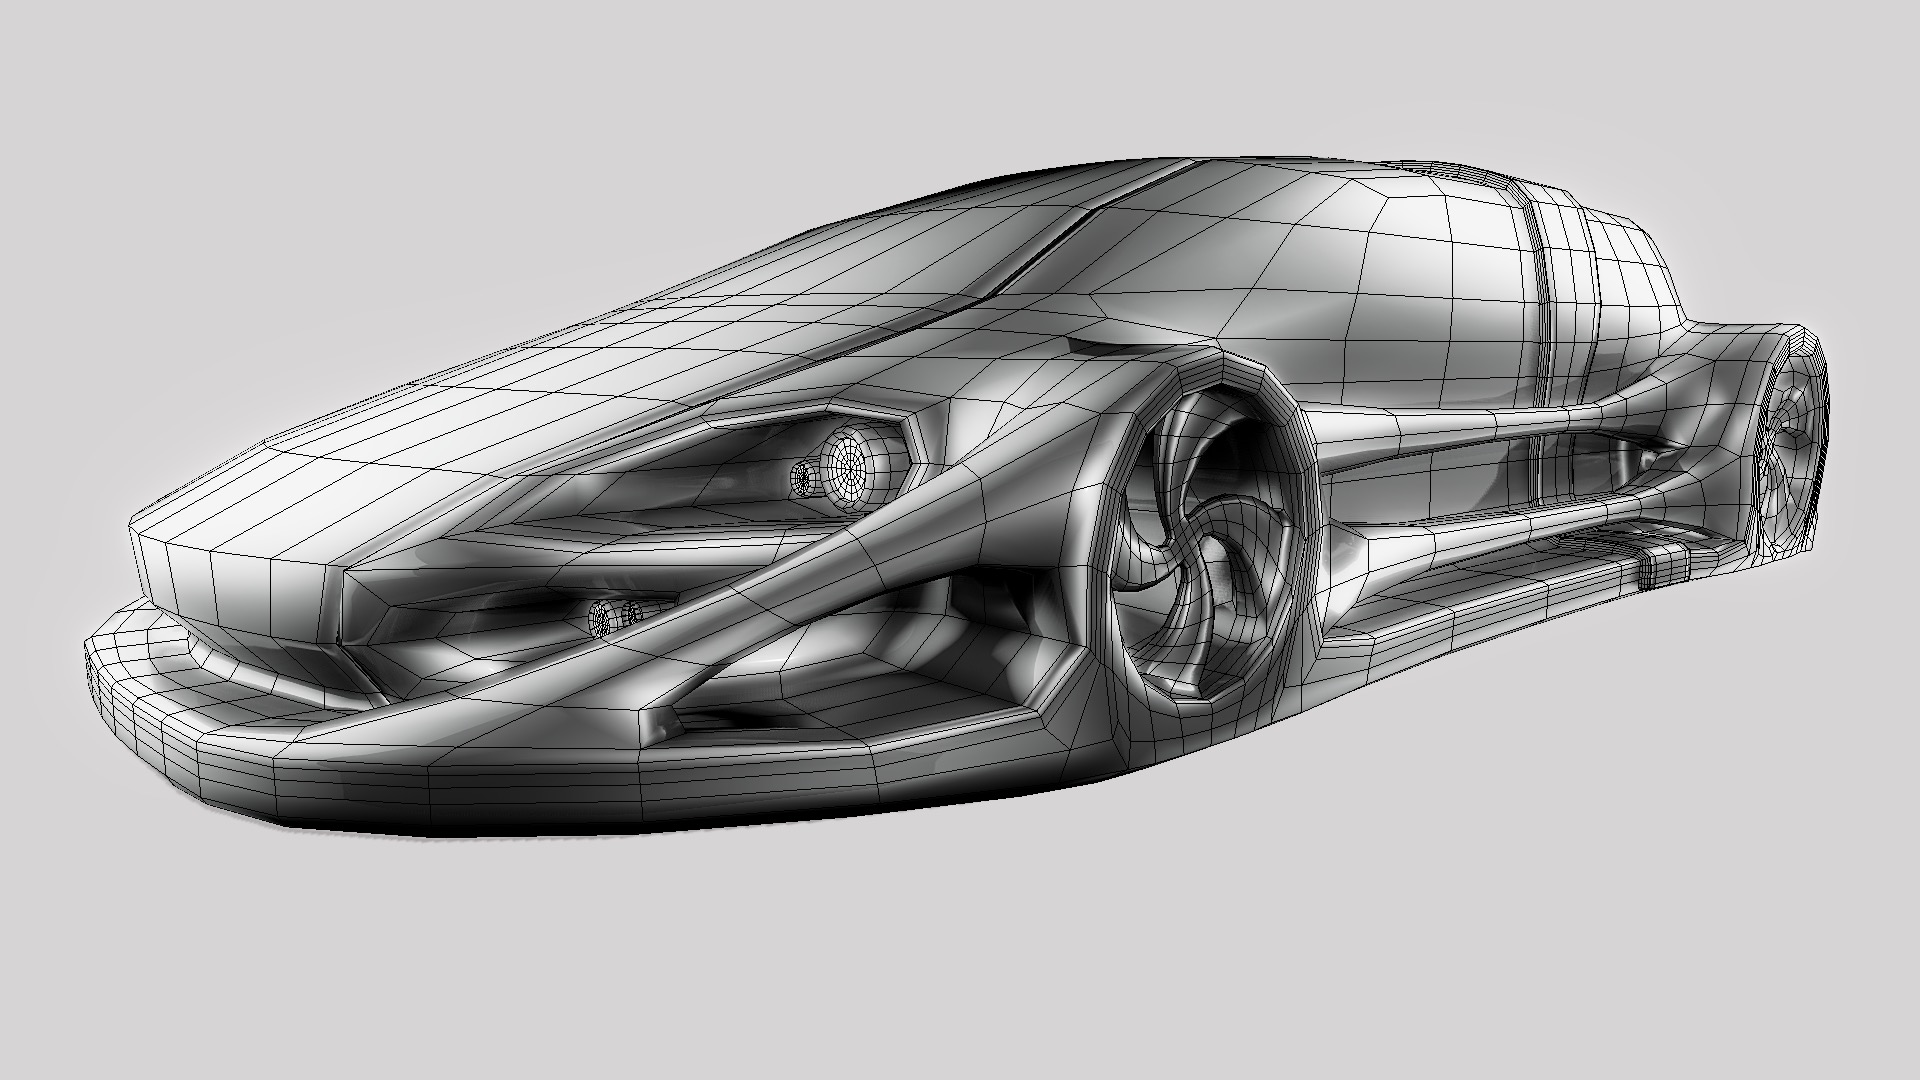 3D model Futuristic Car HD 08 - This is a 3D model of the Futuristic Car HD 08. The 3D model is about diagram, engineering drawing.